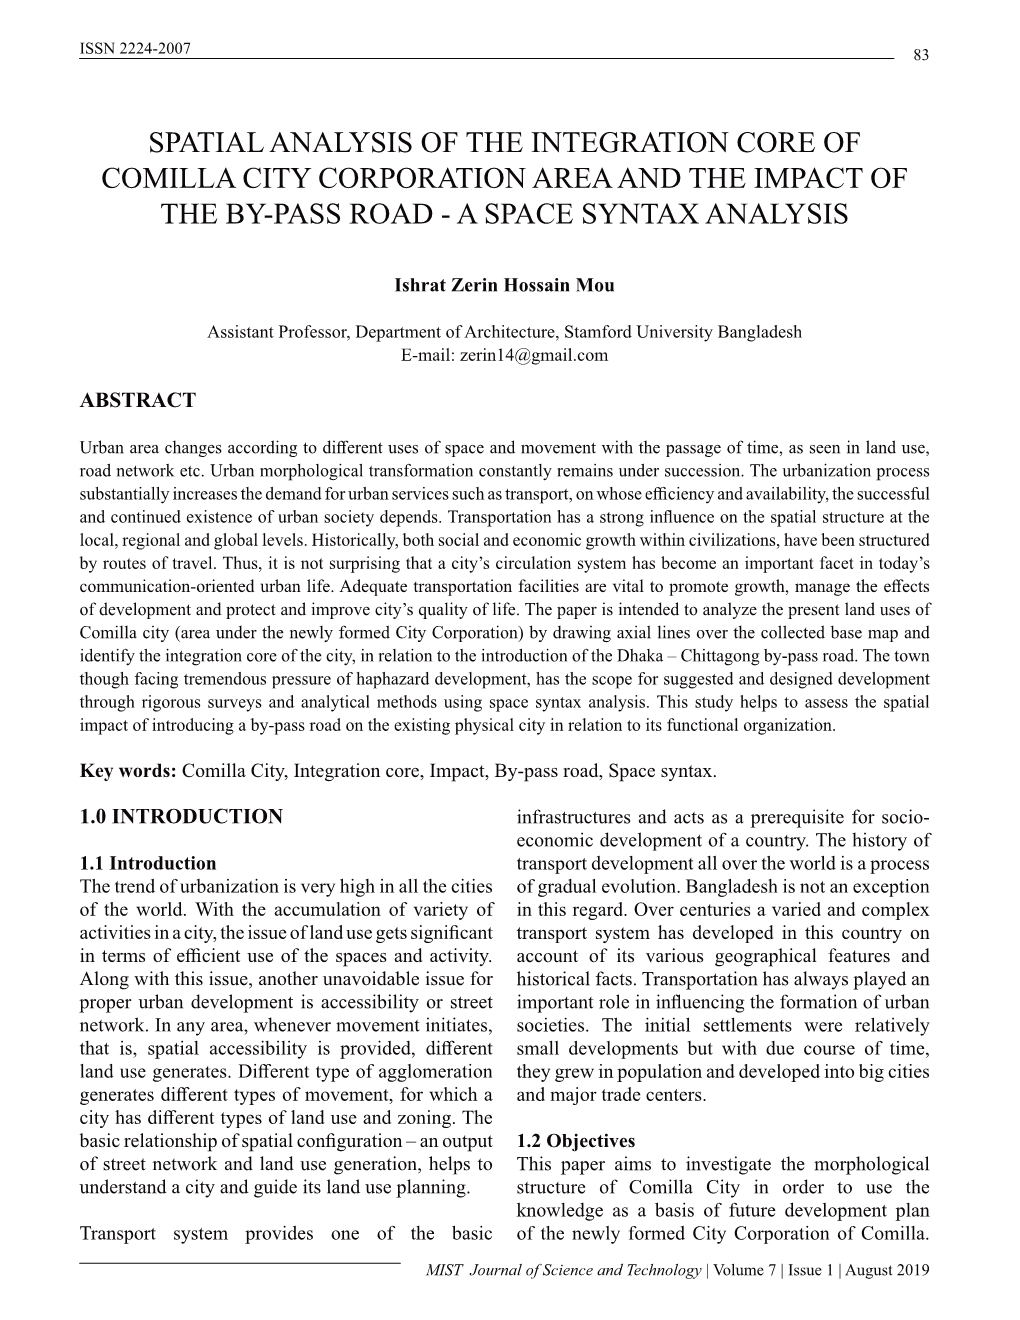 Spatial Analysis of the Integration Core of Comilla City Corporation Area and the Impact of the By-Pass Road - a Space Syntax Analysis